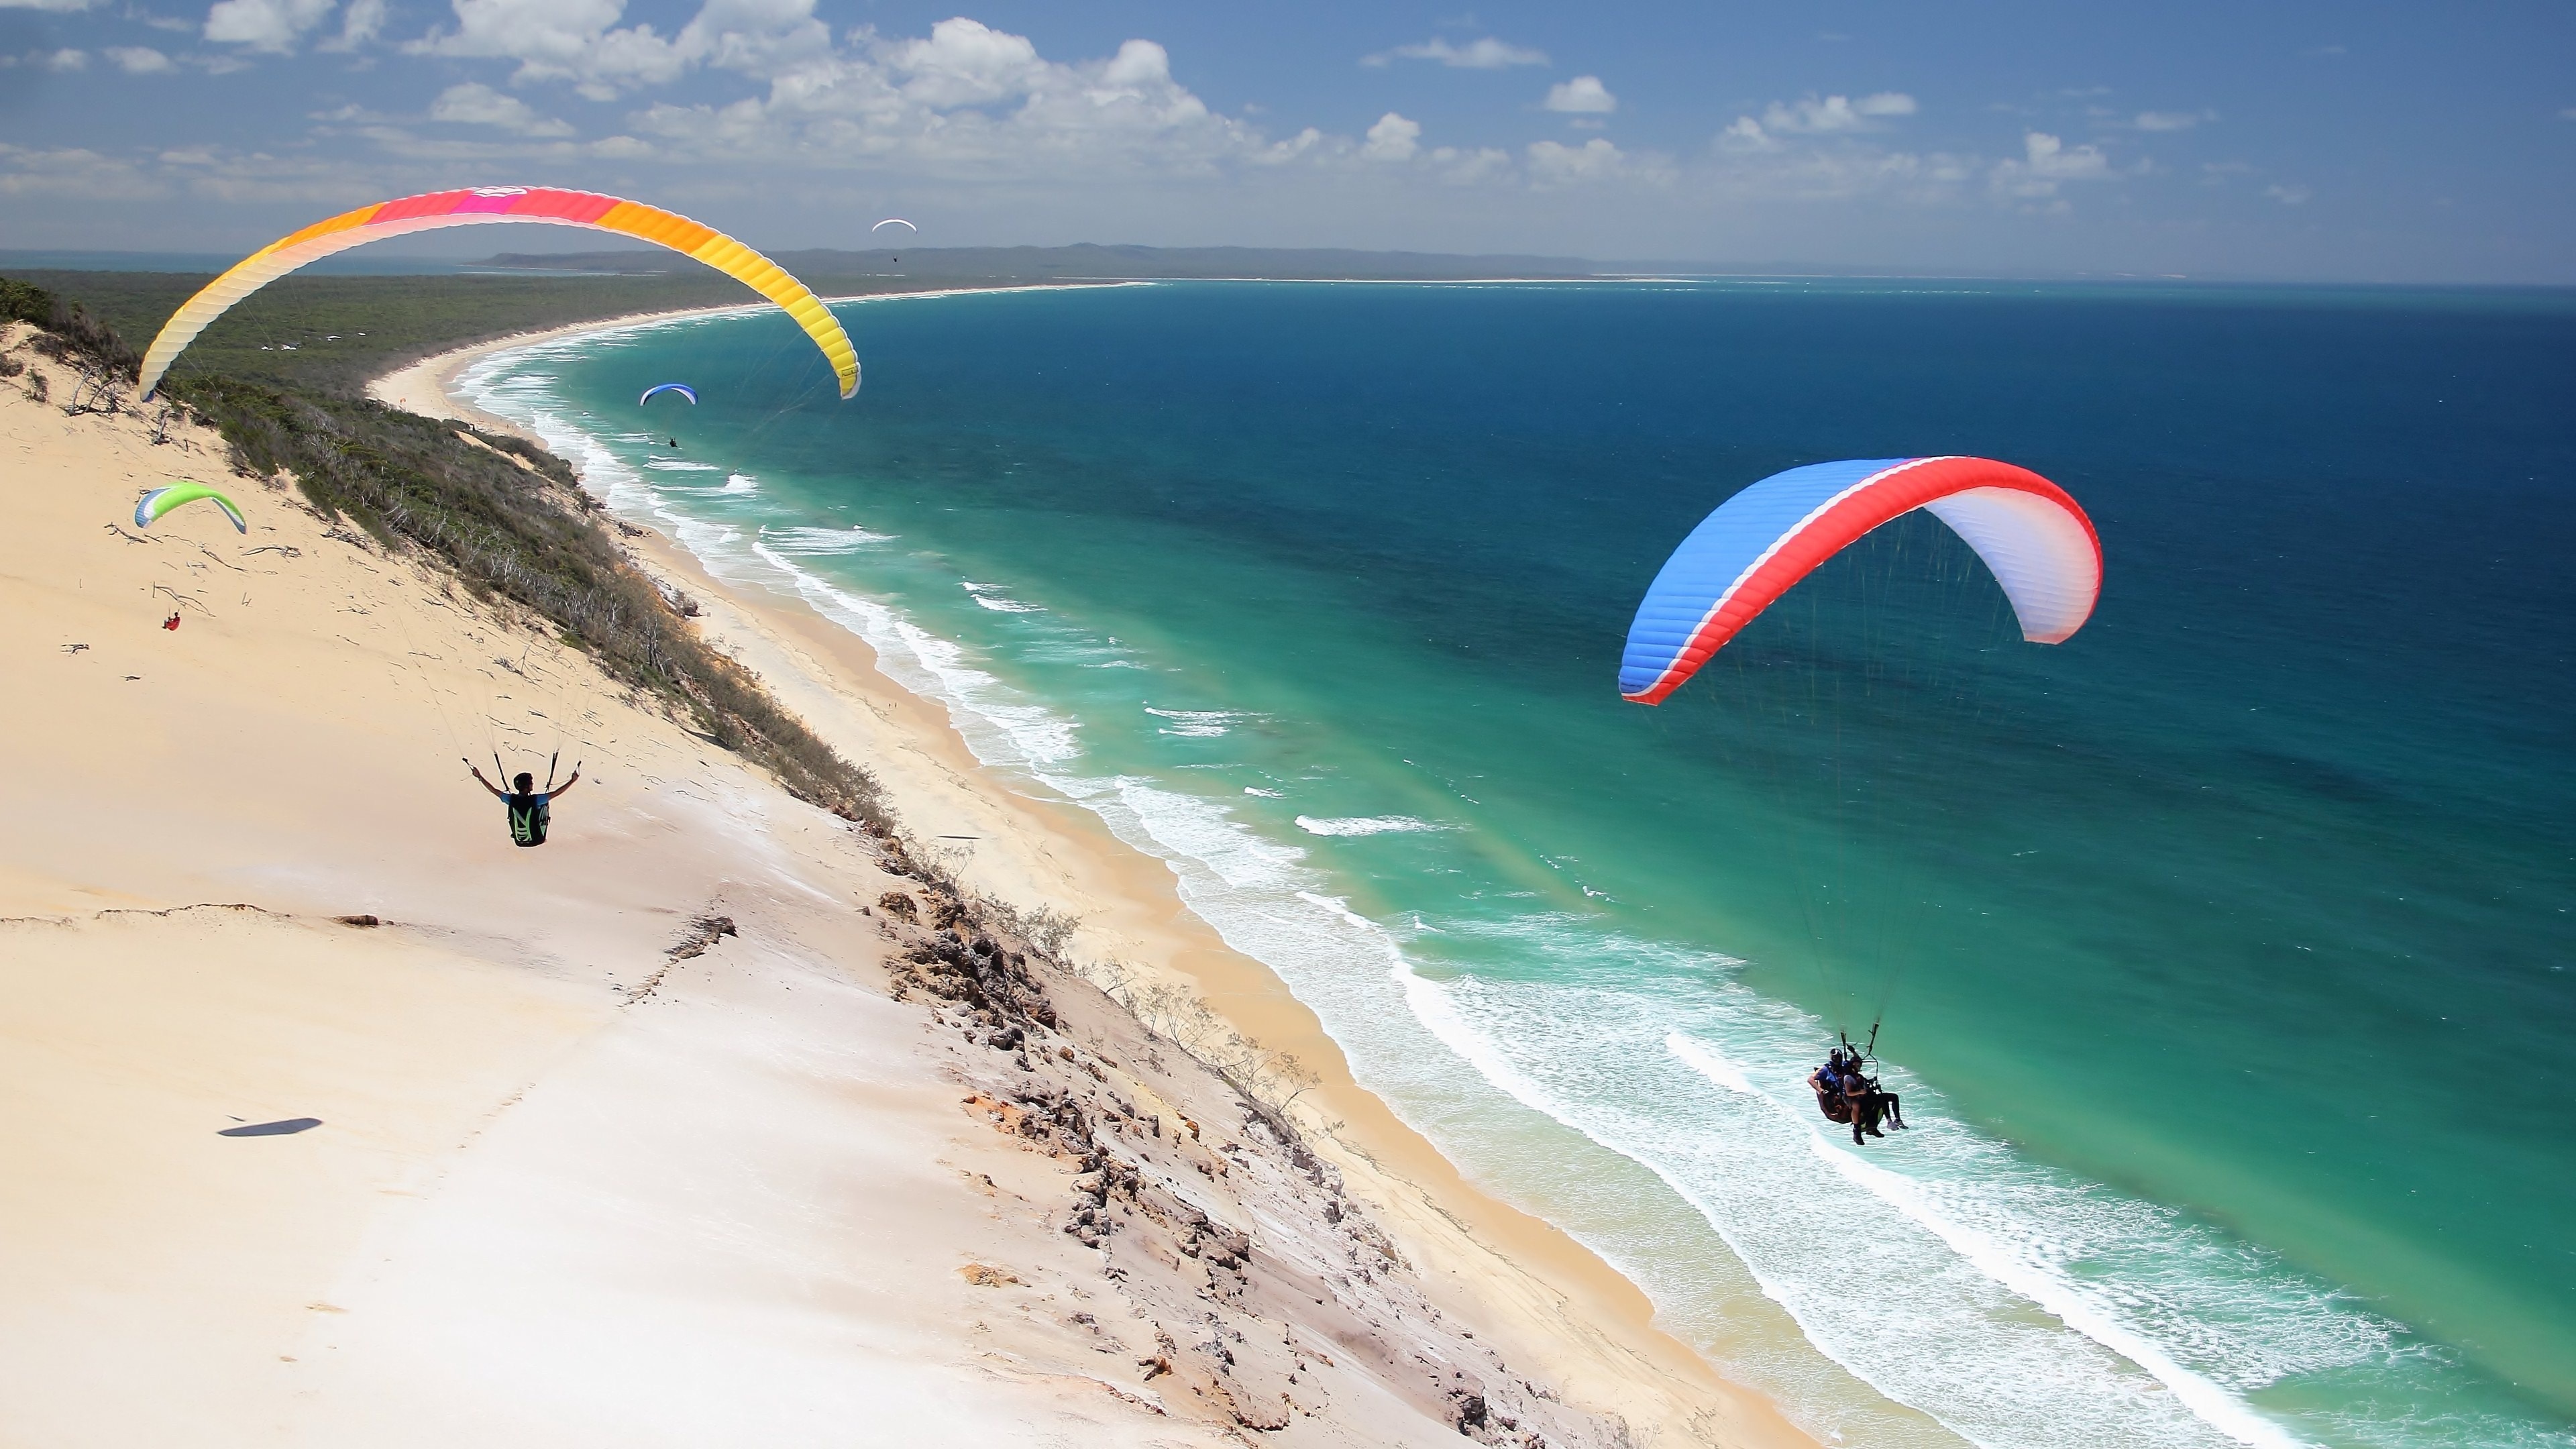 Paragliding: Lightweight aviation, Foot-launched glider, Free-flying. 3840x2160 4K Background.